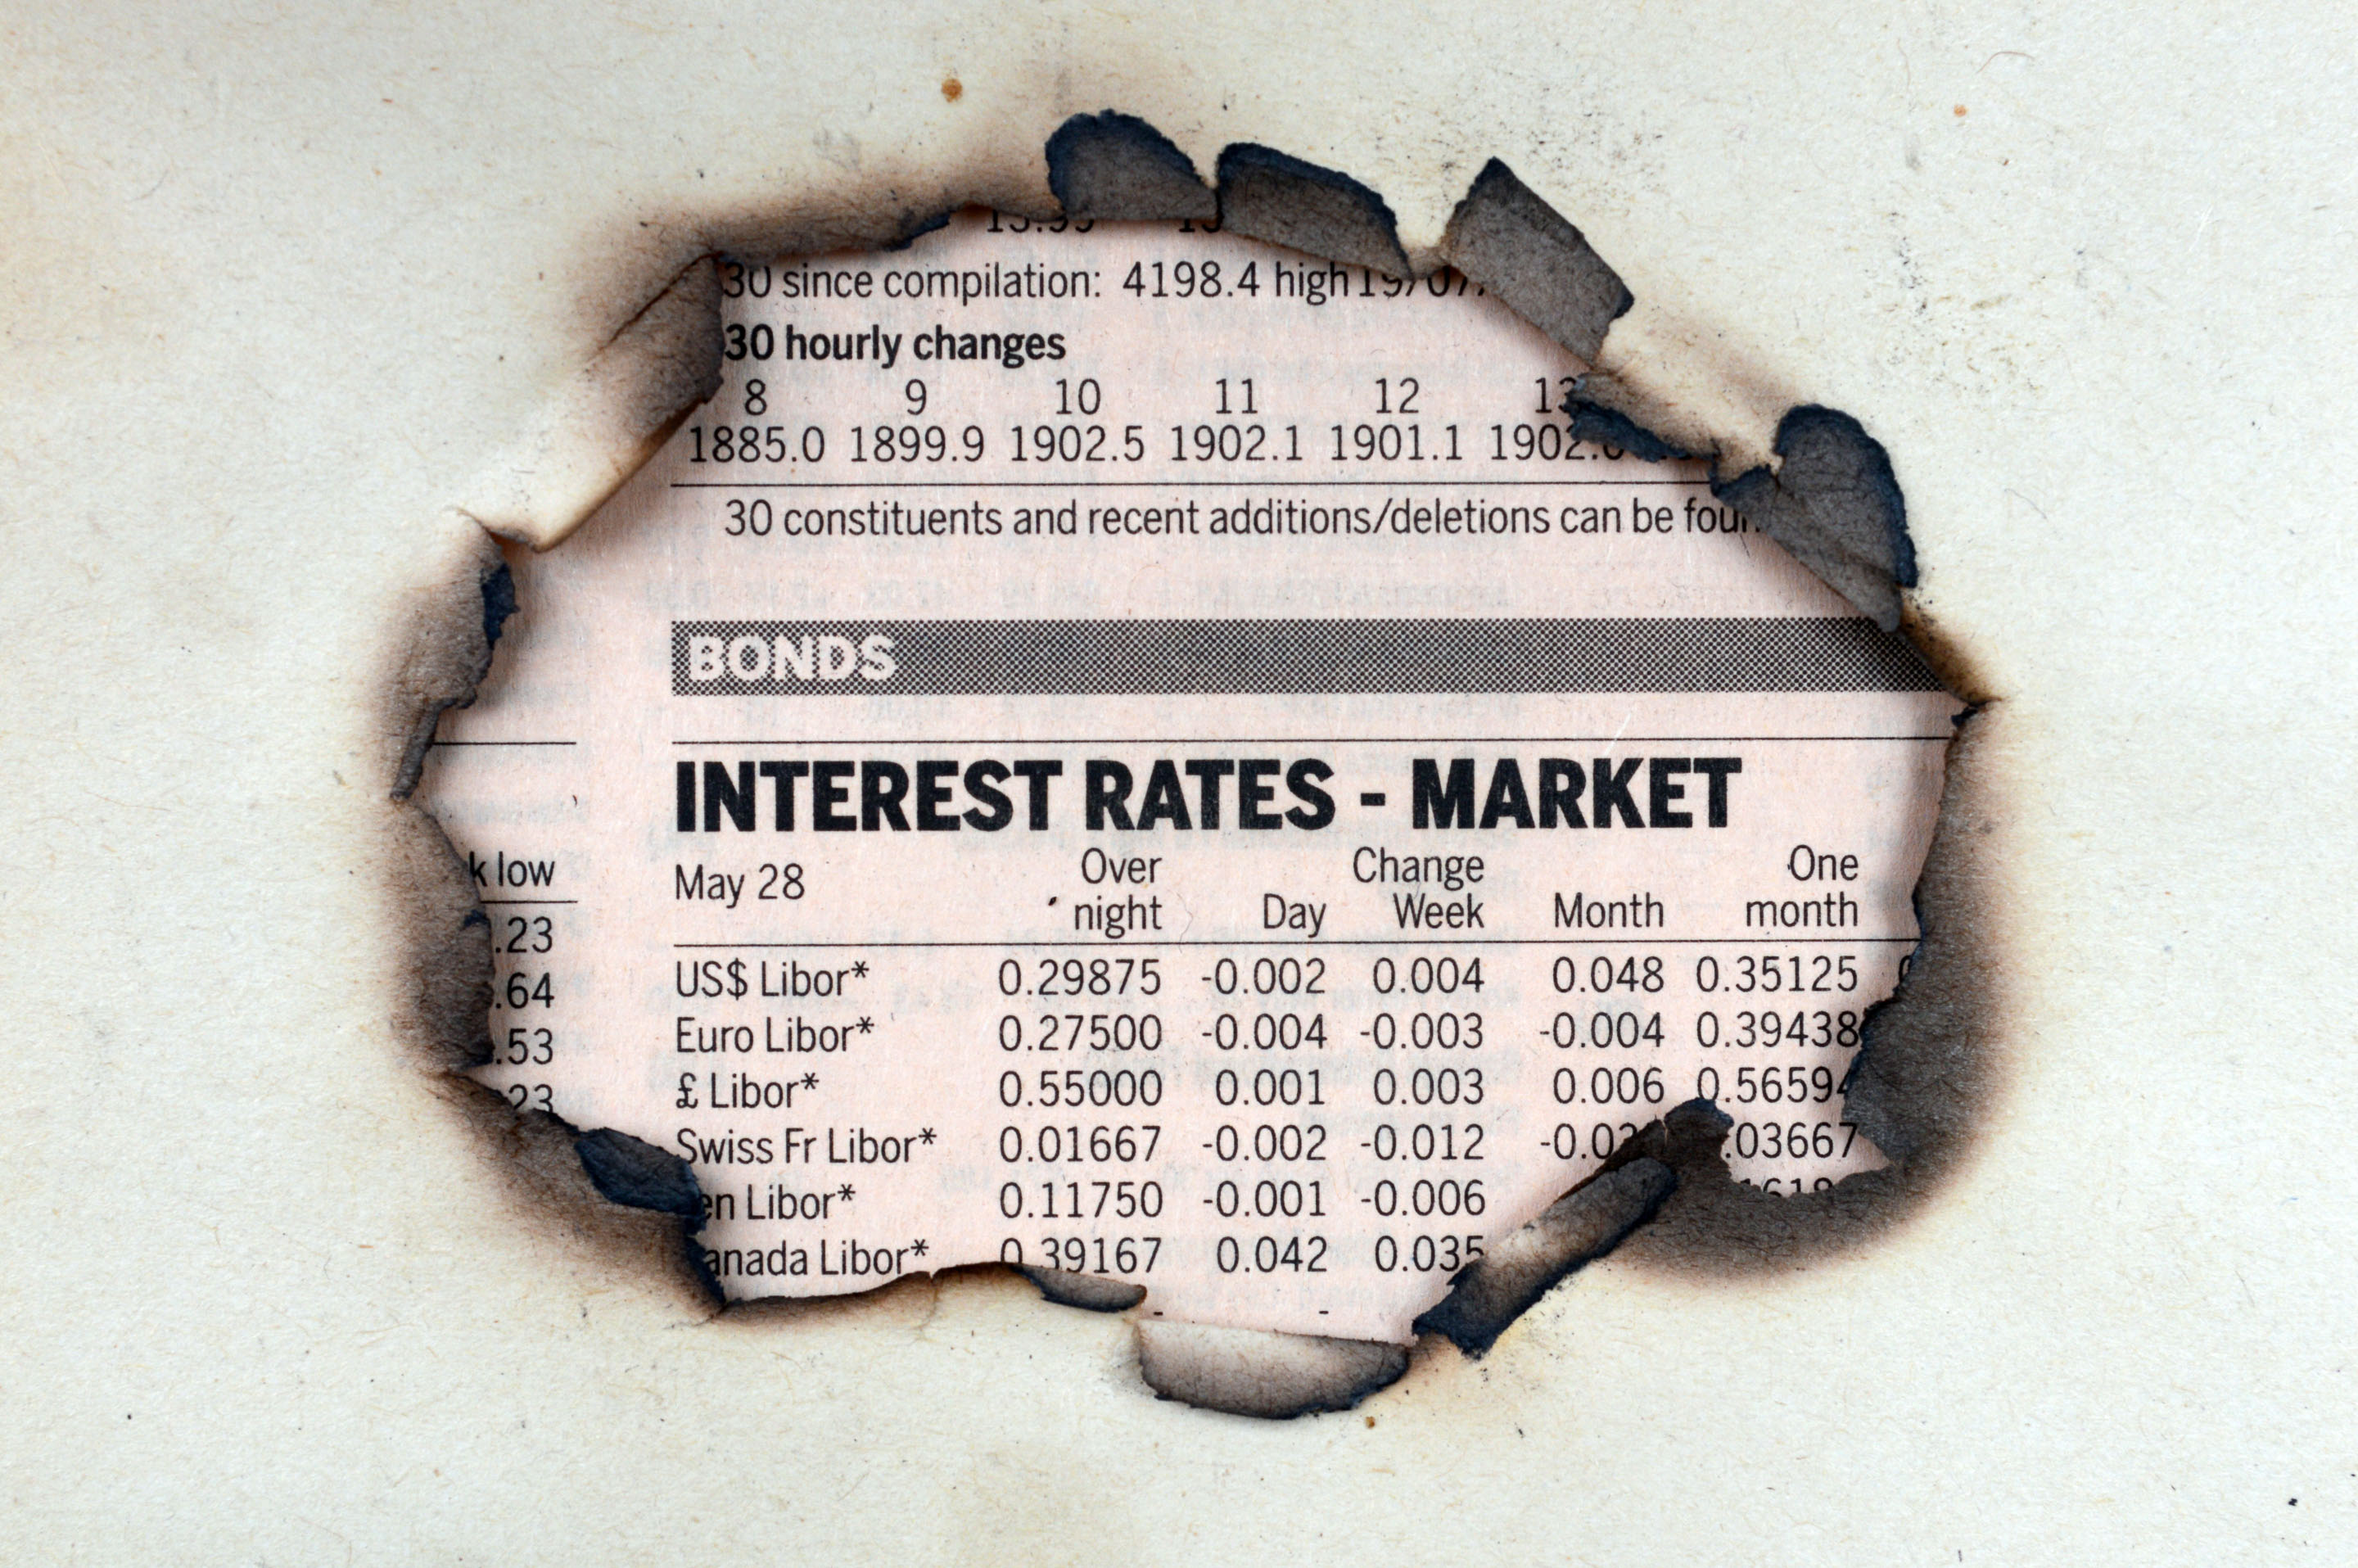 a guide to wy mortgage interest rates go down and up blog article